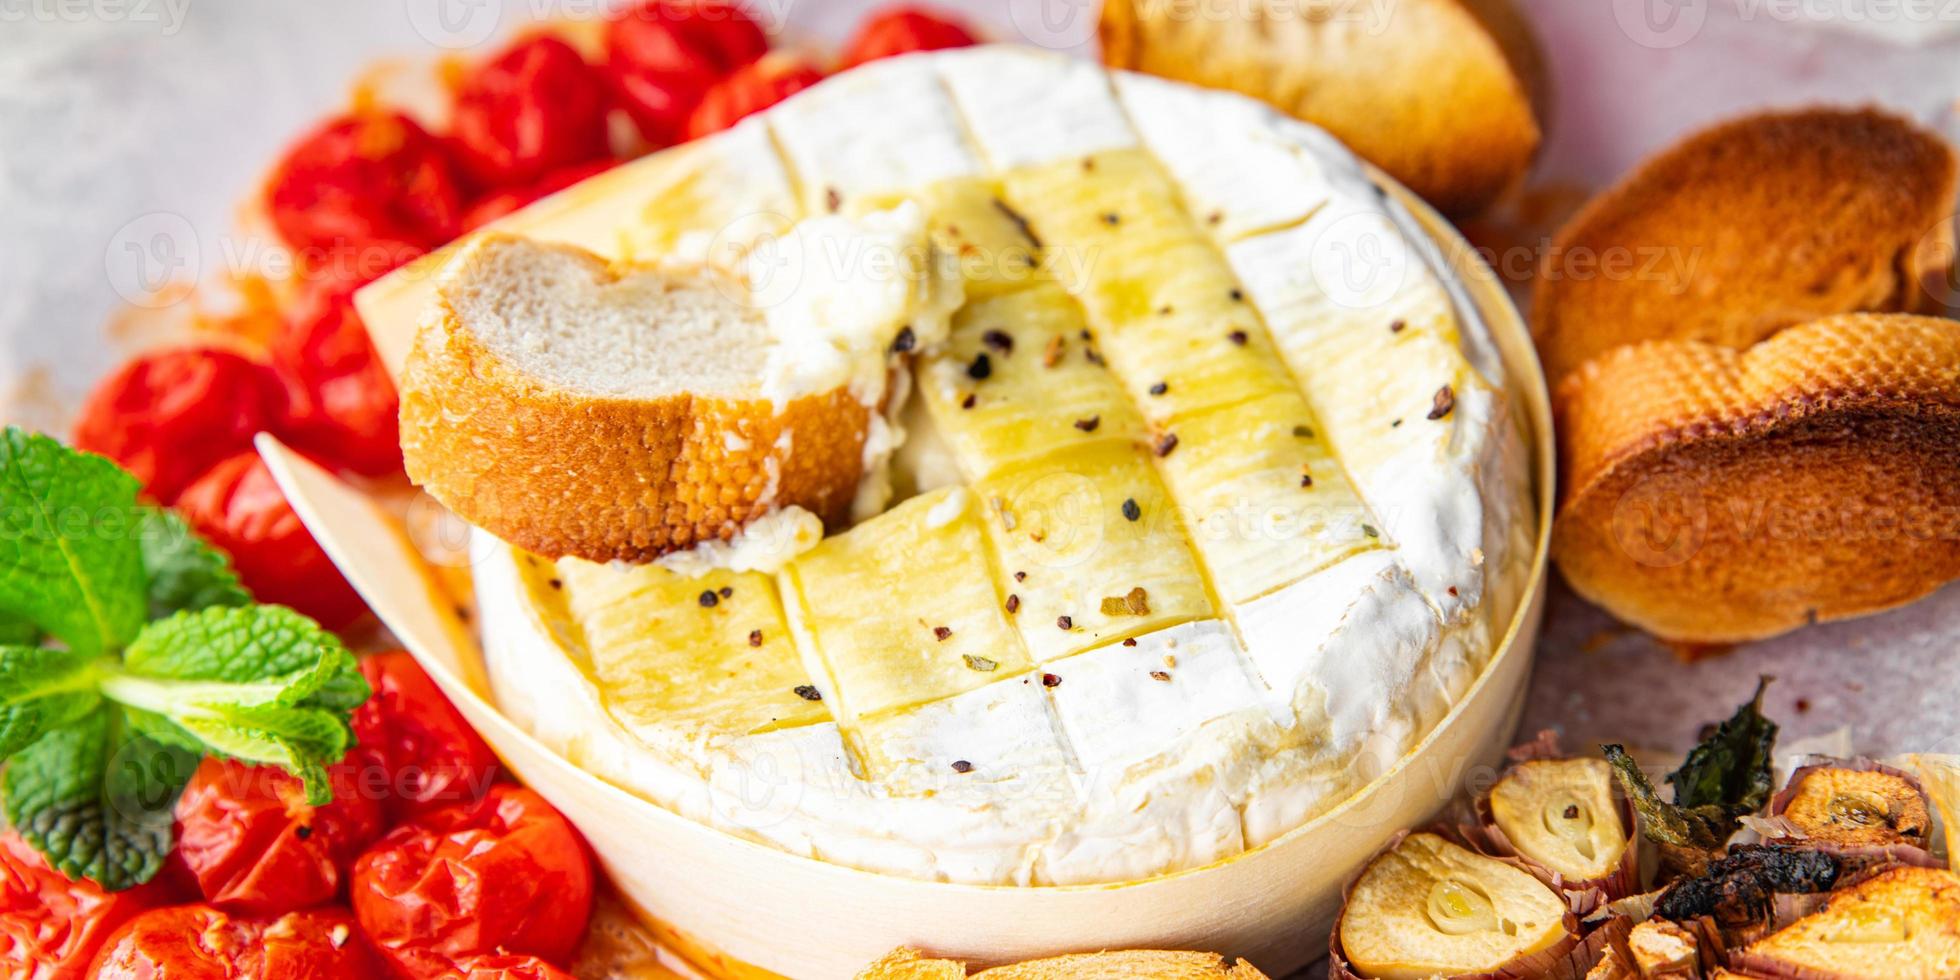 baked soft cheese Brie or Camembert tomato, garlic and herbs meal food snack on the table copy space food background rustic top view photo